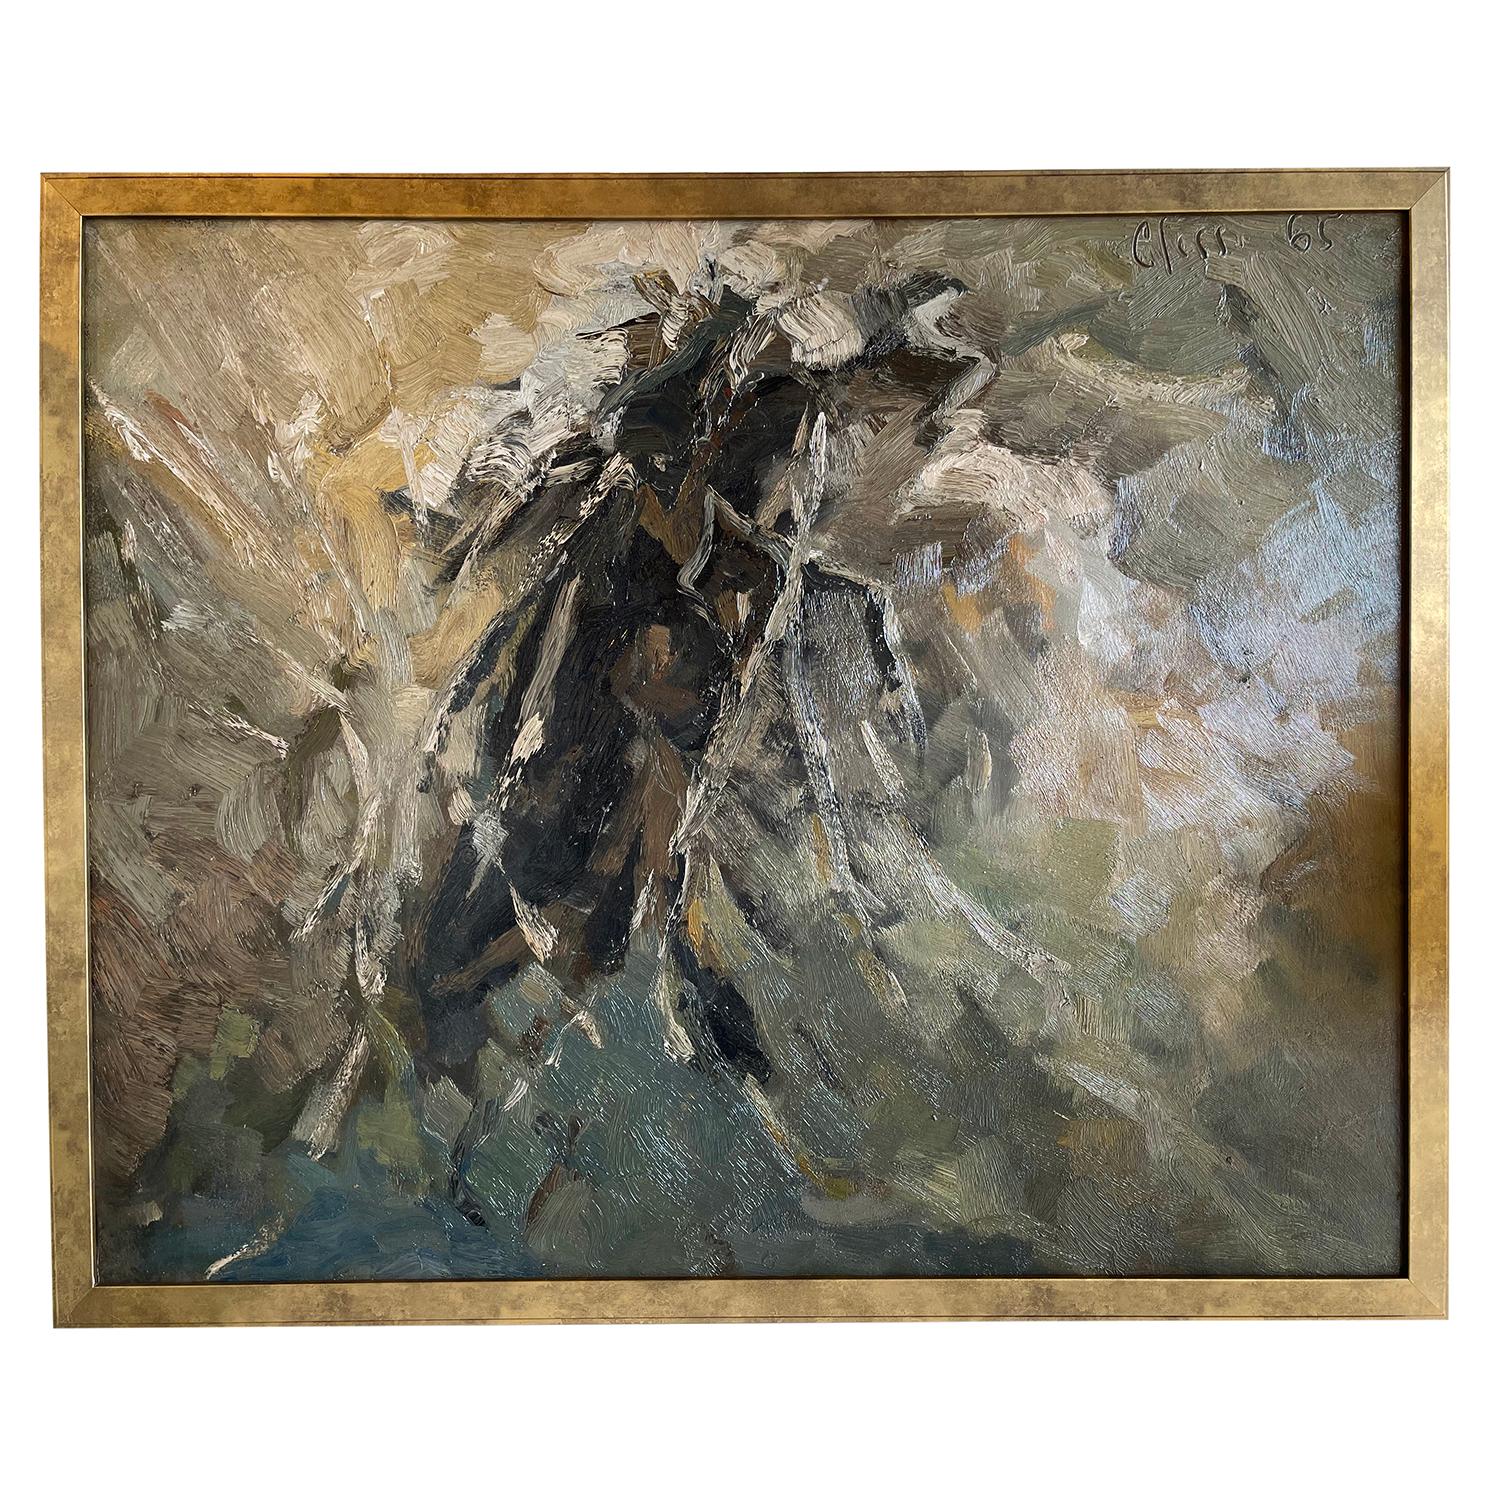 A grey-brown, black vintage Mid-Century modern French abstract oil on wood landscape painting, painted by Daniel Clesse in good condition. Signed on the top right. Wear consistent with age and use. Dated in 1965, Paris, France.

Without the frame: